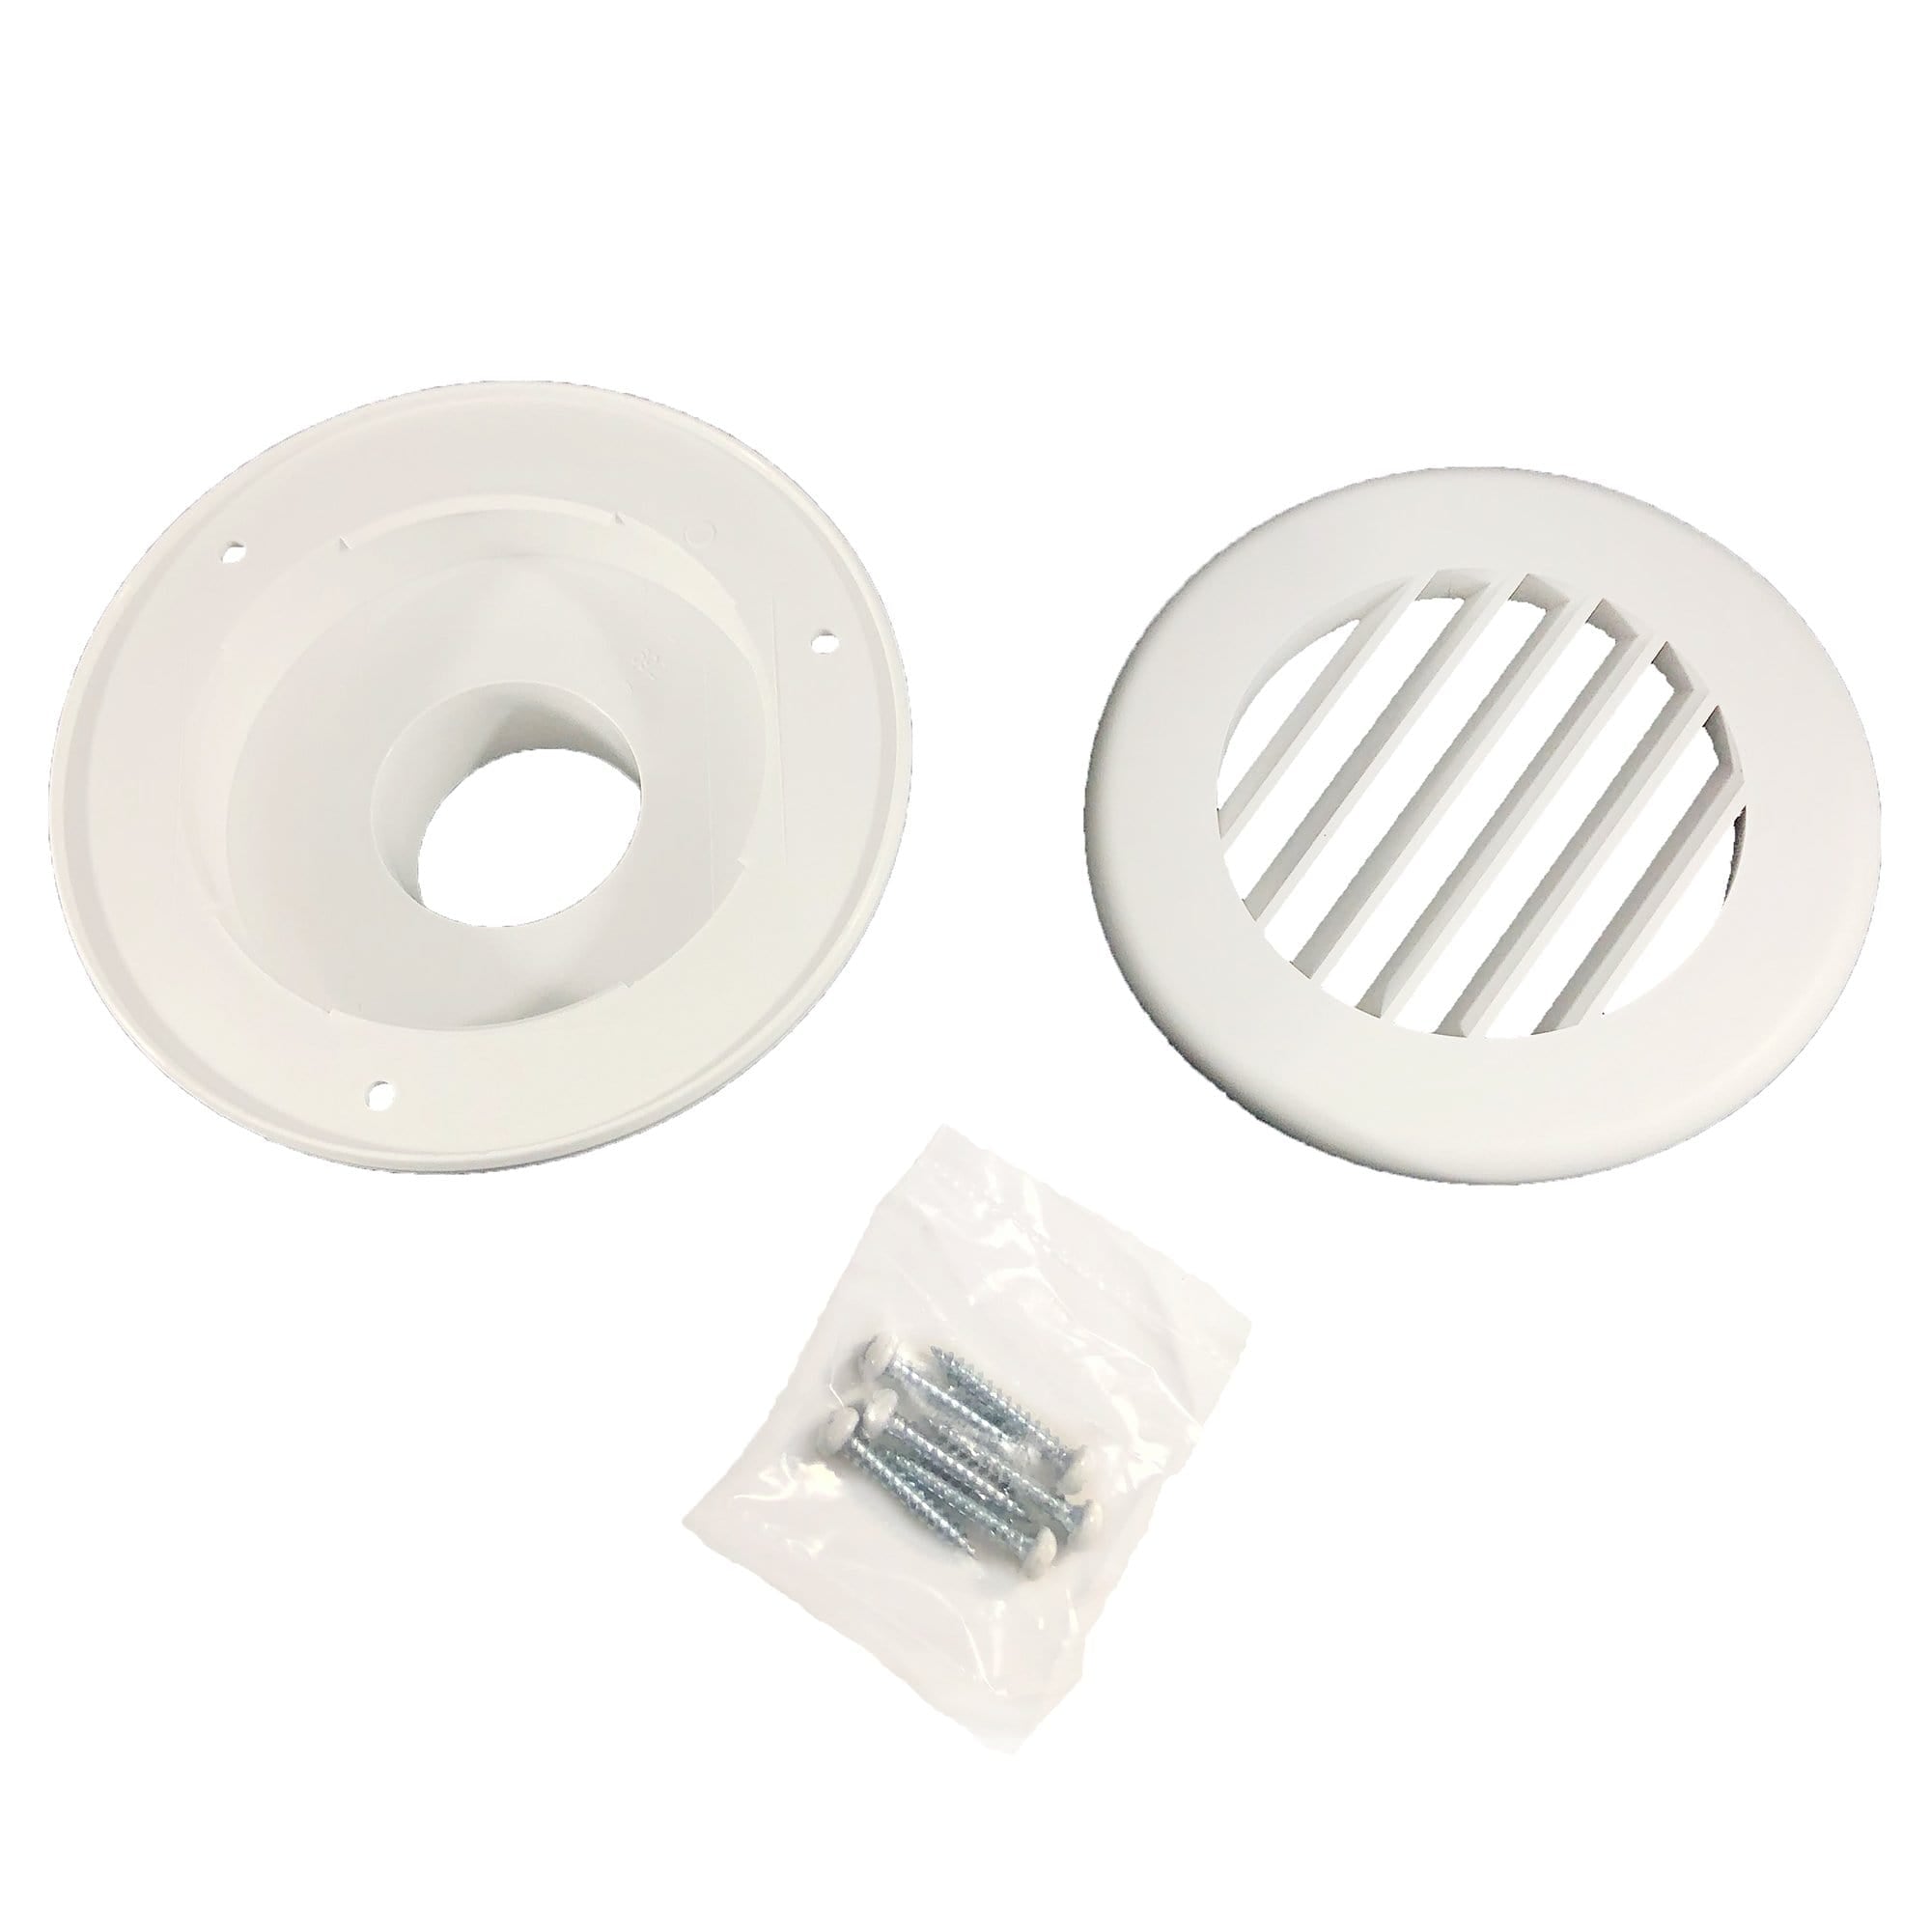 Thetford 94261 (601-015-94261) B&B Molders 2" Thermovent Ducted Heat Vent, No Damper, Polar White